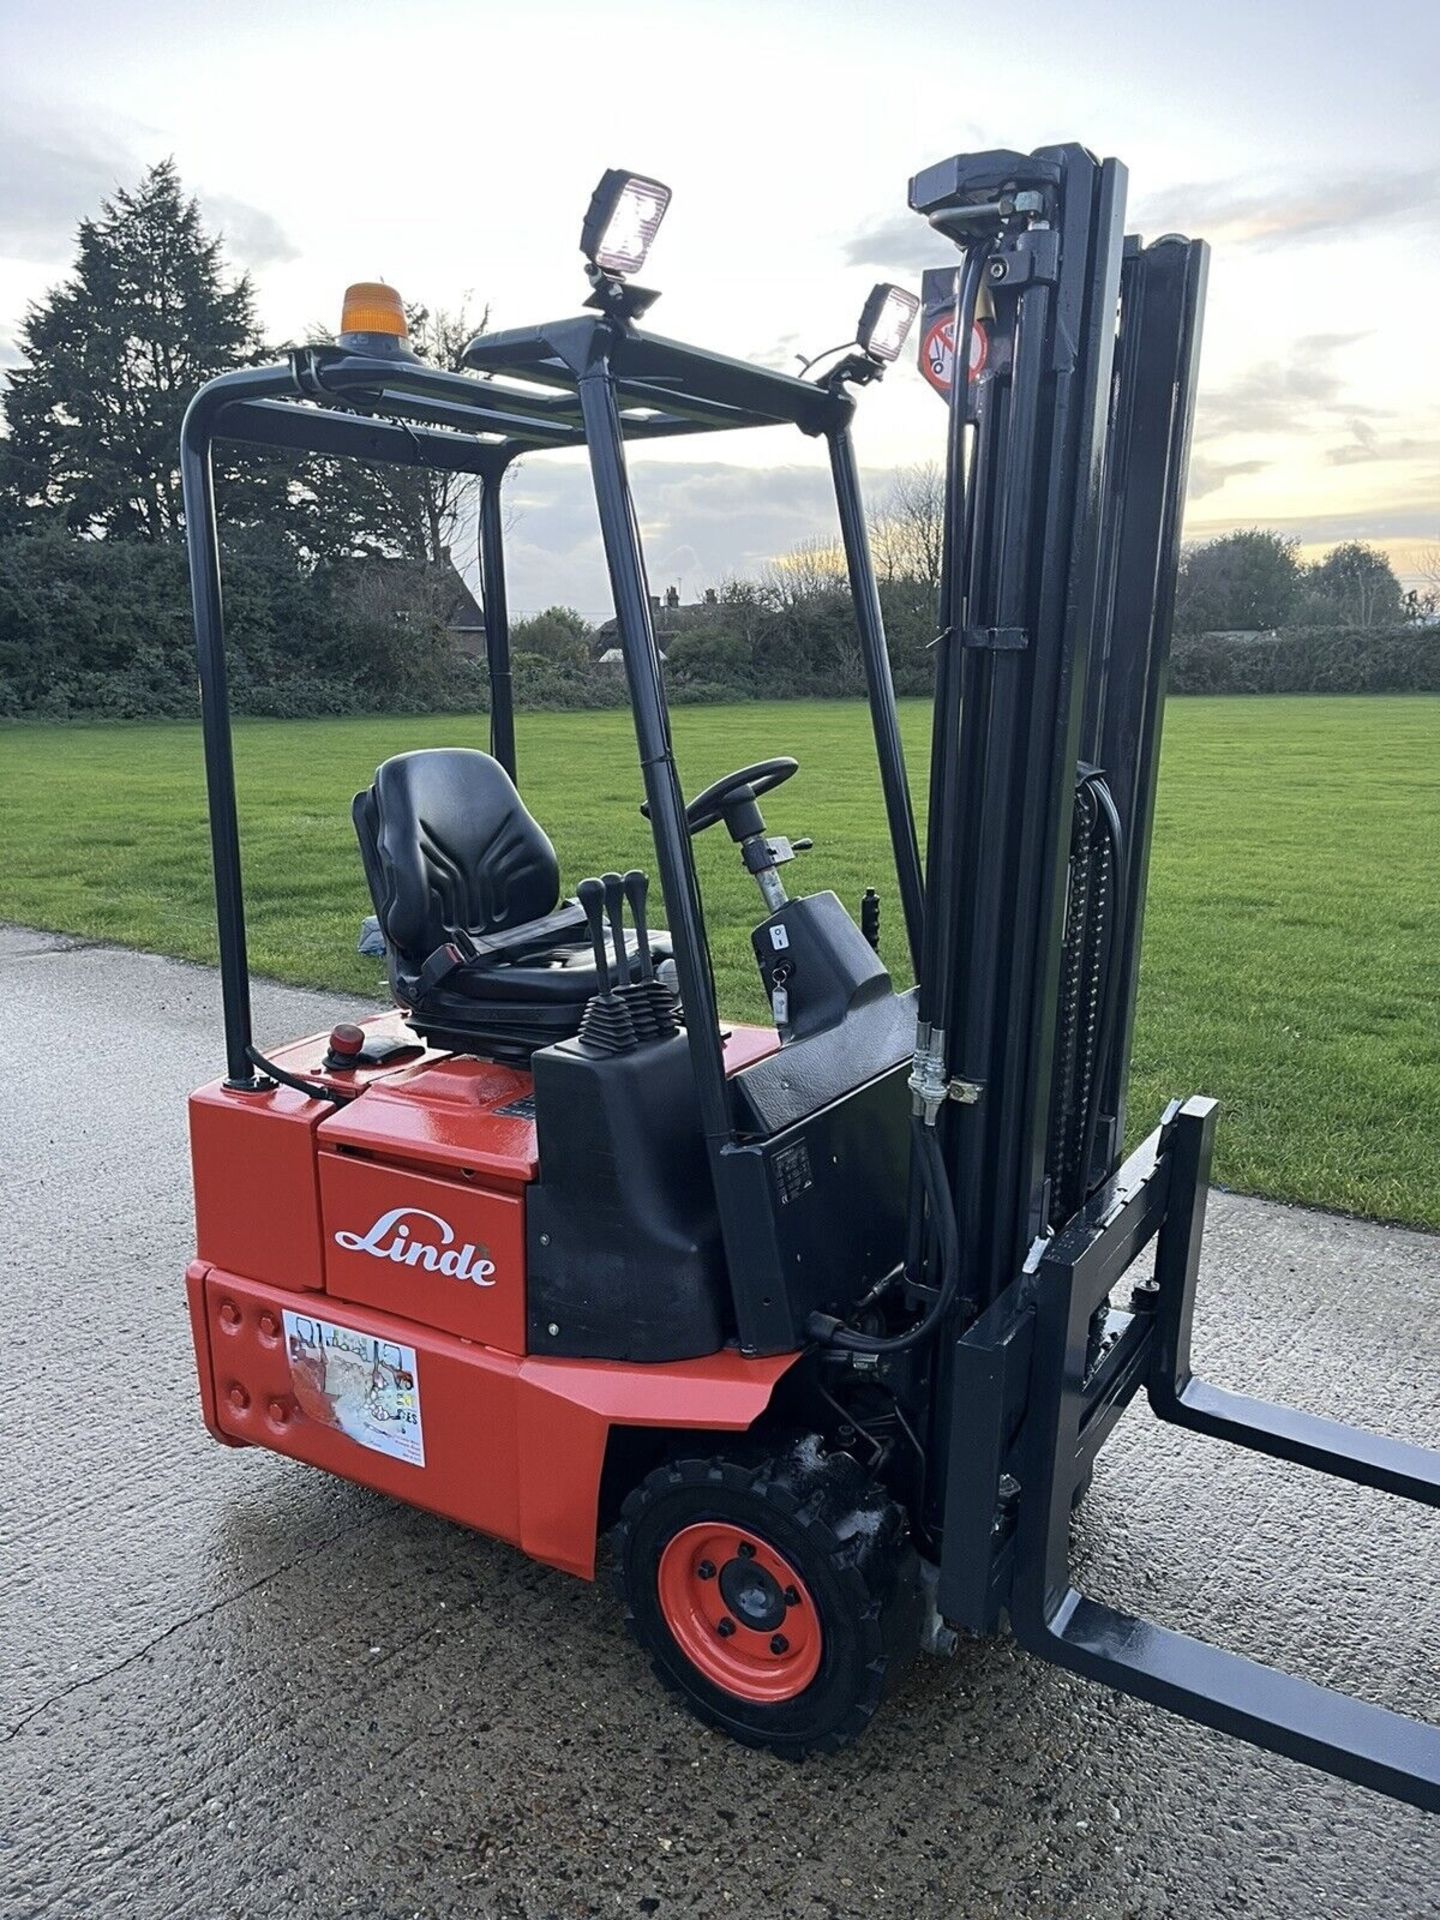 LINDE 1.2 Electric Forklift Truck Container Spec - Image 6 of 6